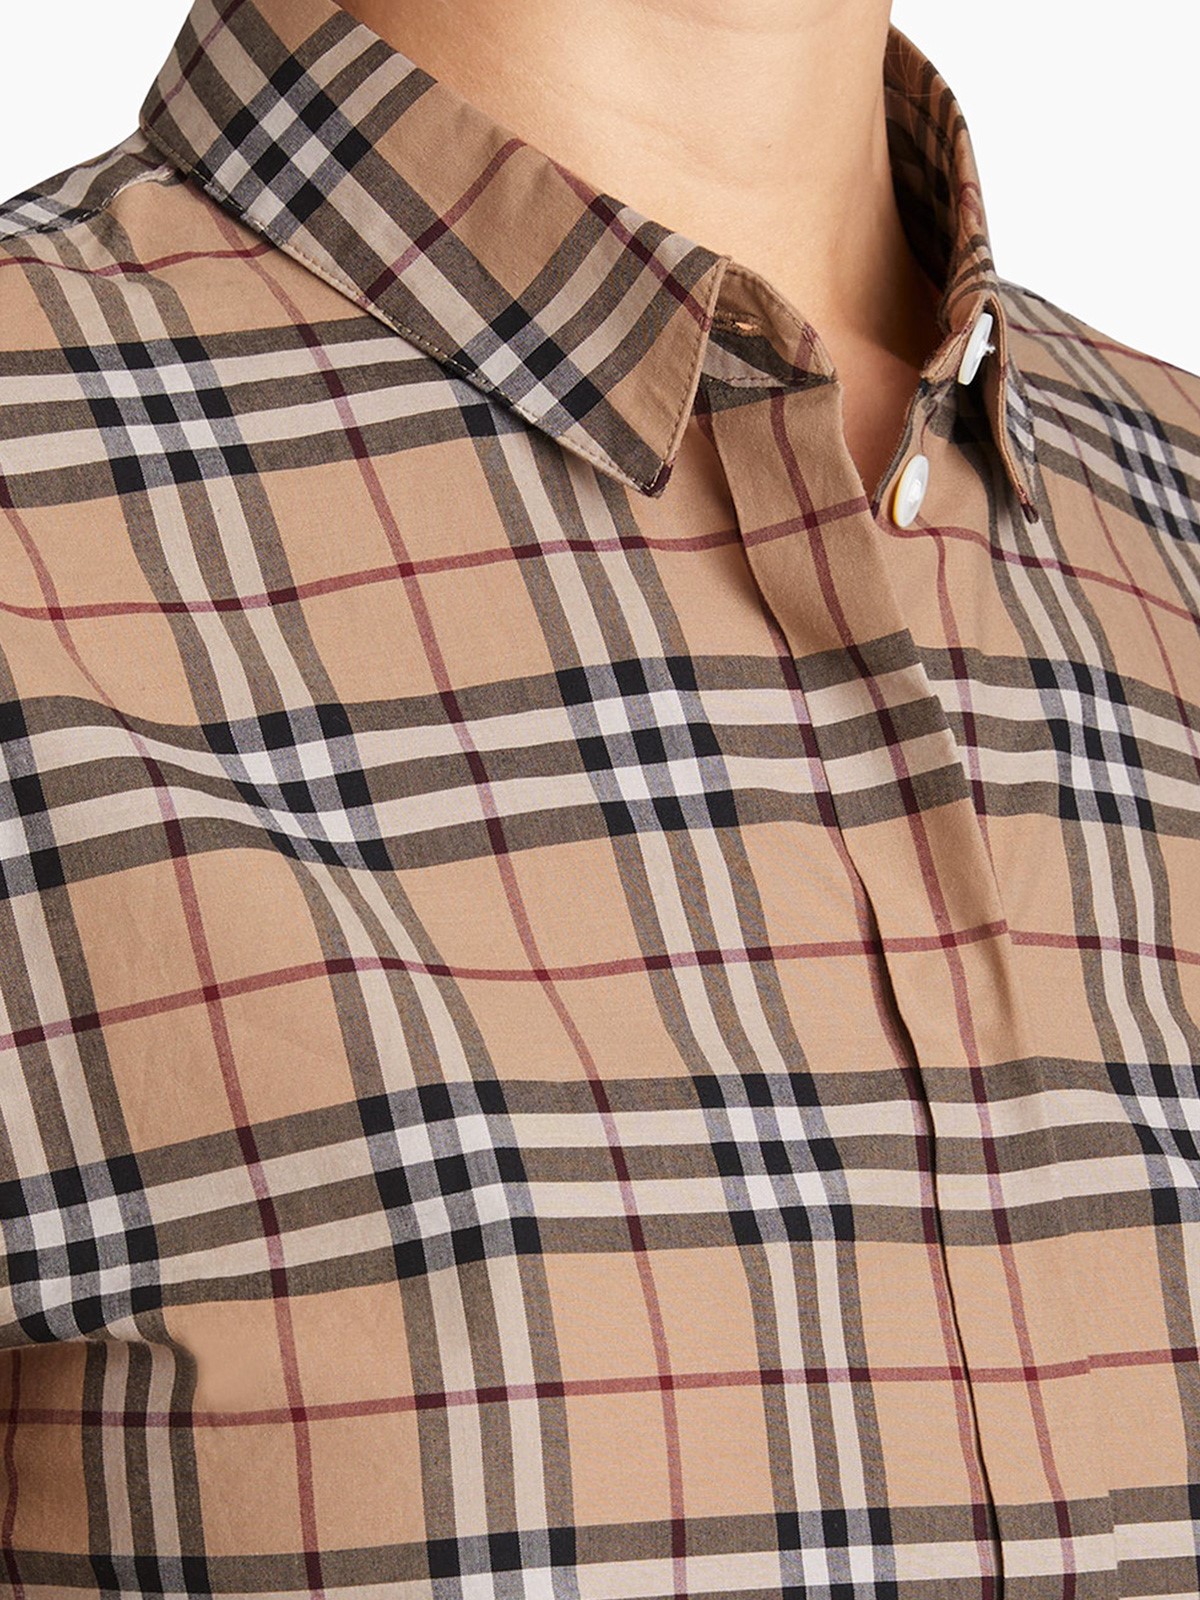 burberry CHECK VINTAGE SHIRT available on montiboutique.com - 21901